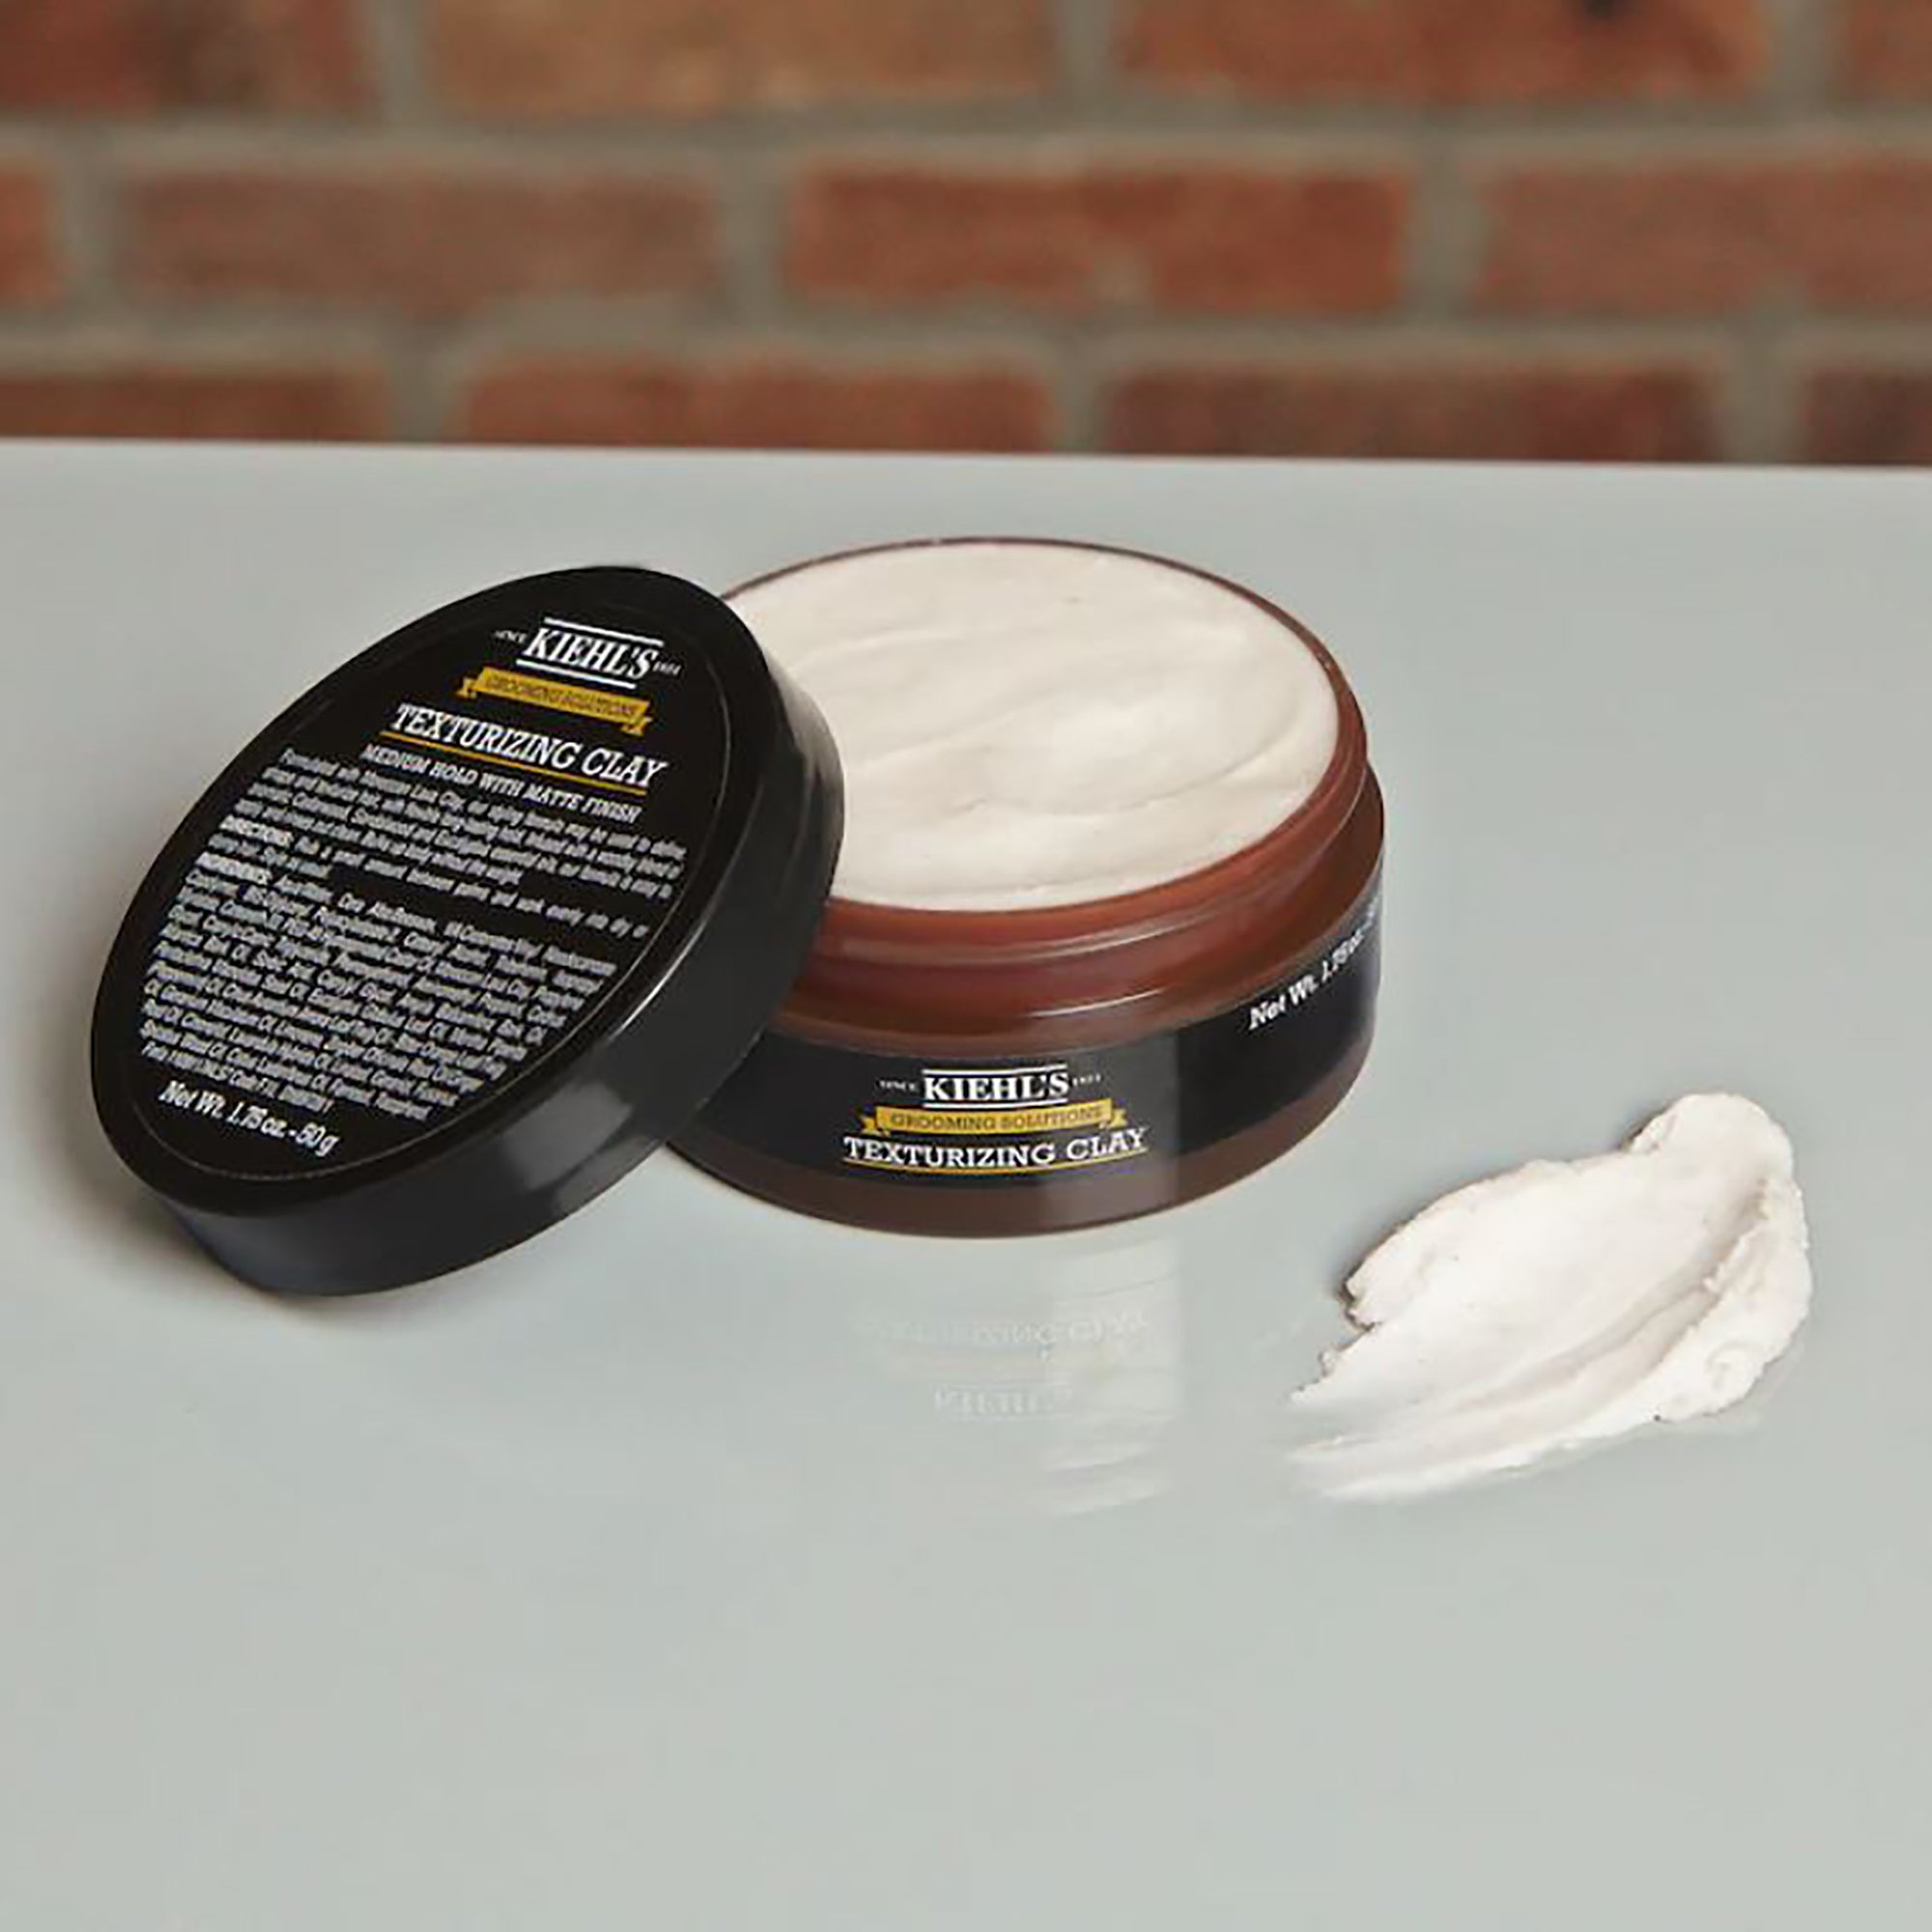 Kiehl's Grooming Solutions Texturizing Clay / 1.75